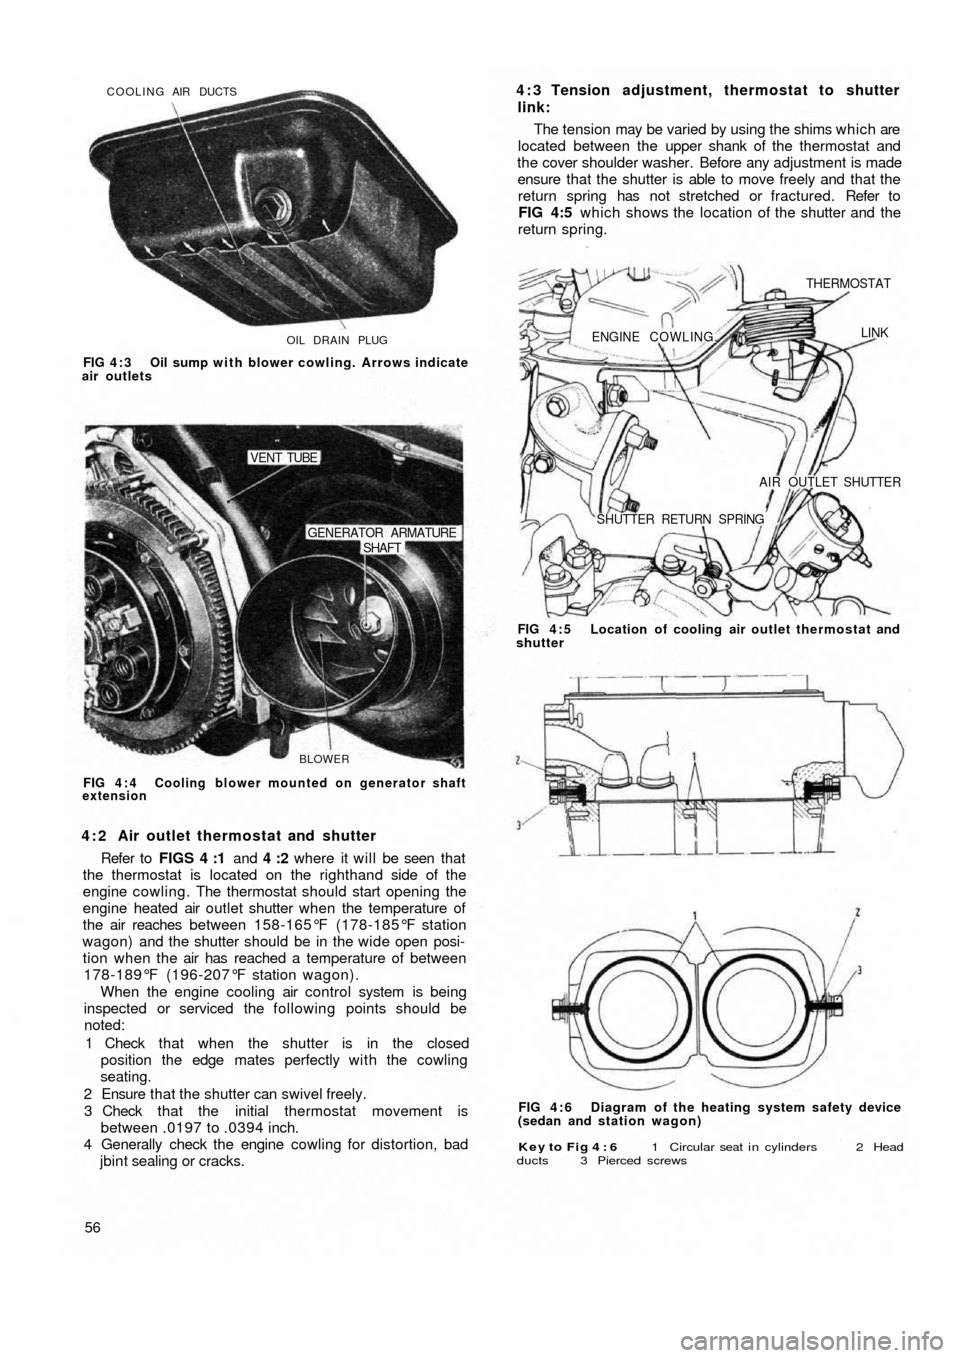 FIAT 500 1964 1.G Workshop Manual OIL DRAIN PLUG COOLING AIR DUCTS
FIG 4 : 3  Oil sump with blower cowling. Arrows indicate
air outlets
BLOWER
SHAFT GENERATOR ARMATURE
VENT TUBE
FIG 4 : 4  Cooling blower mounted on generator shaft
ext